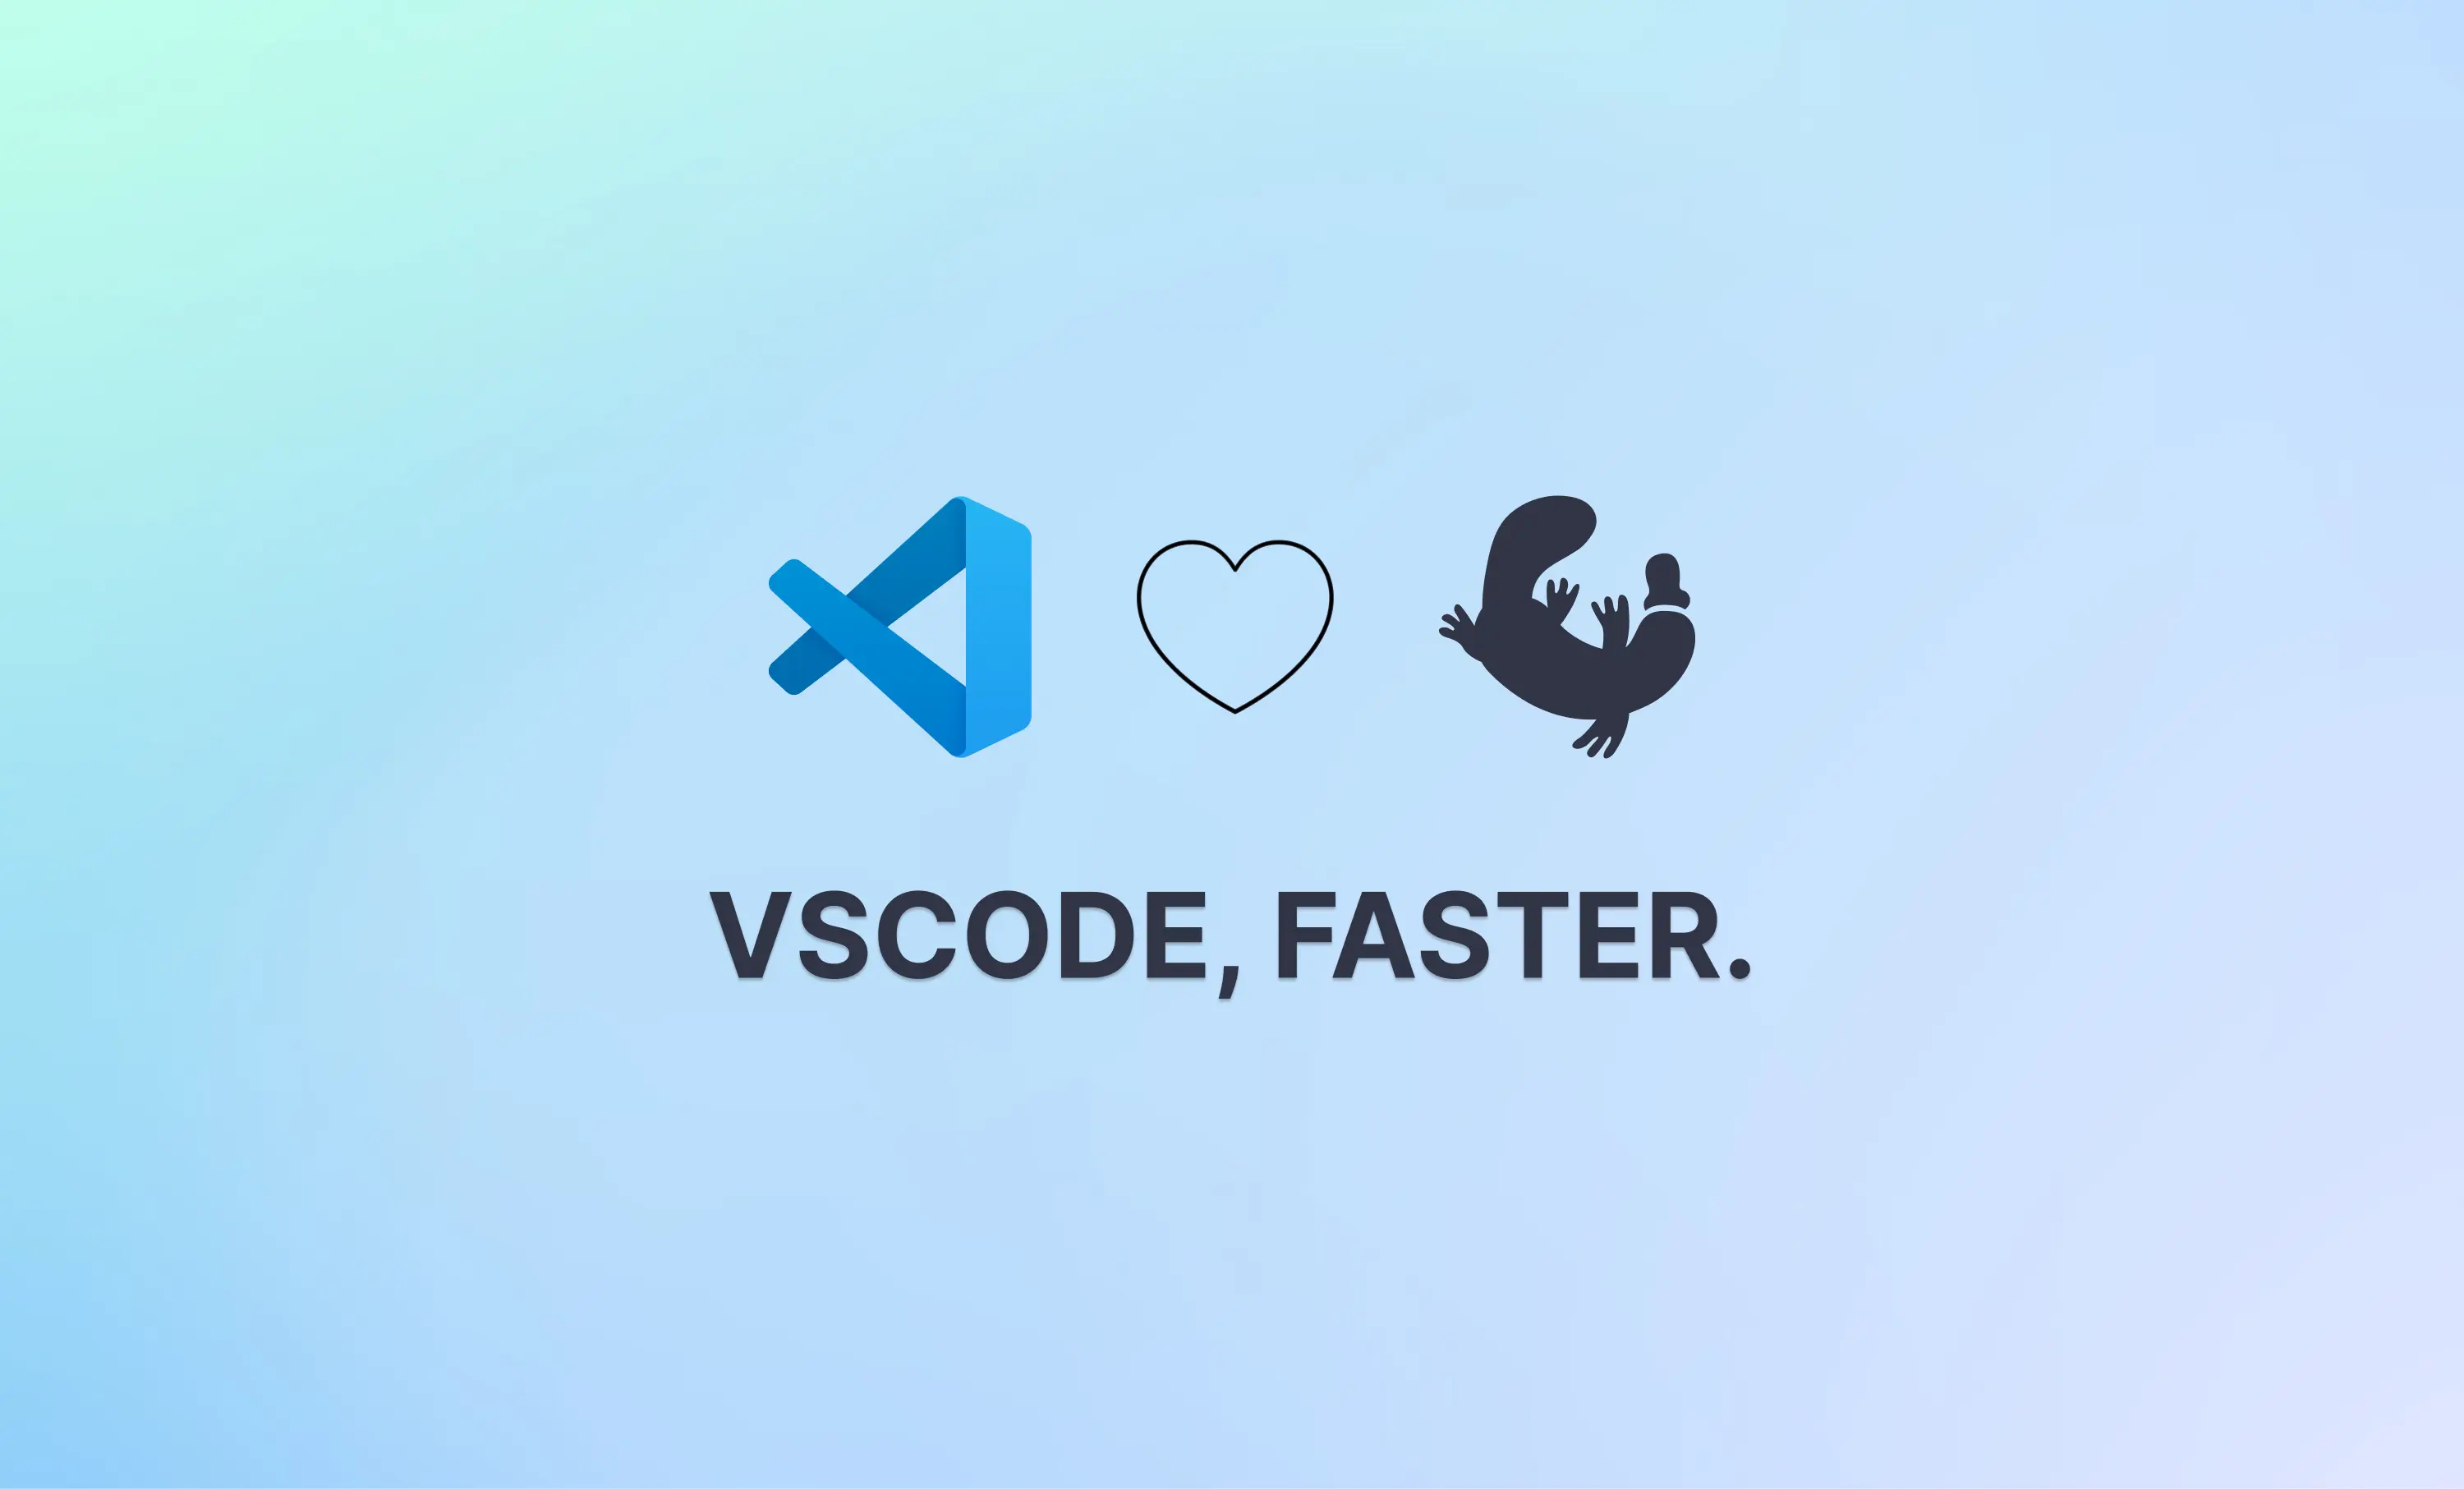 Work Faster in VSCode Without Needing a Mouse